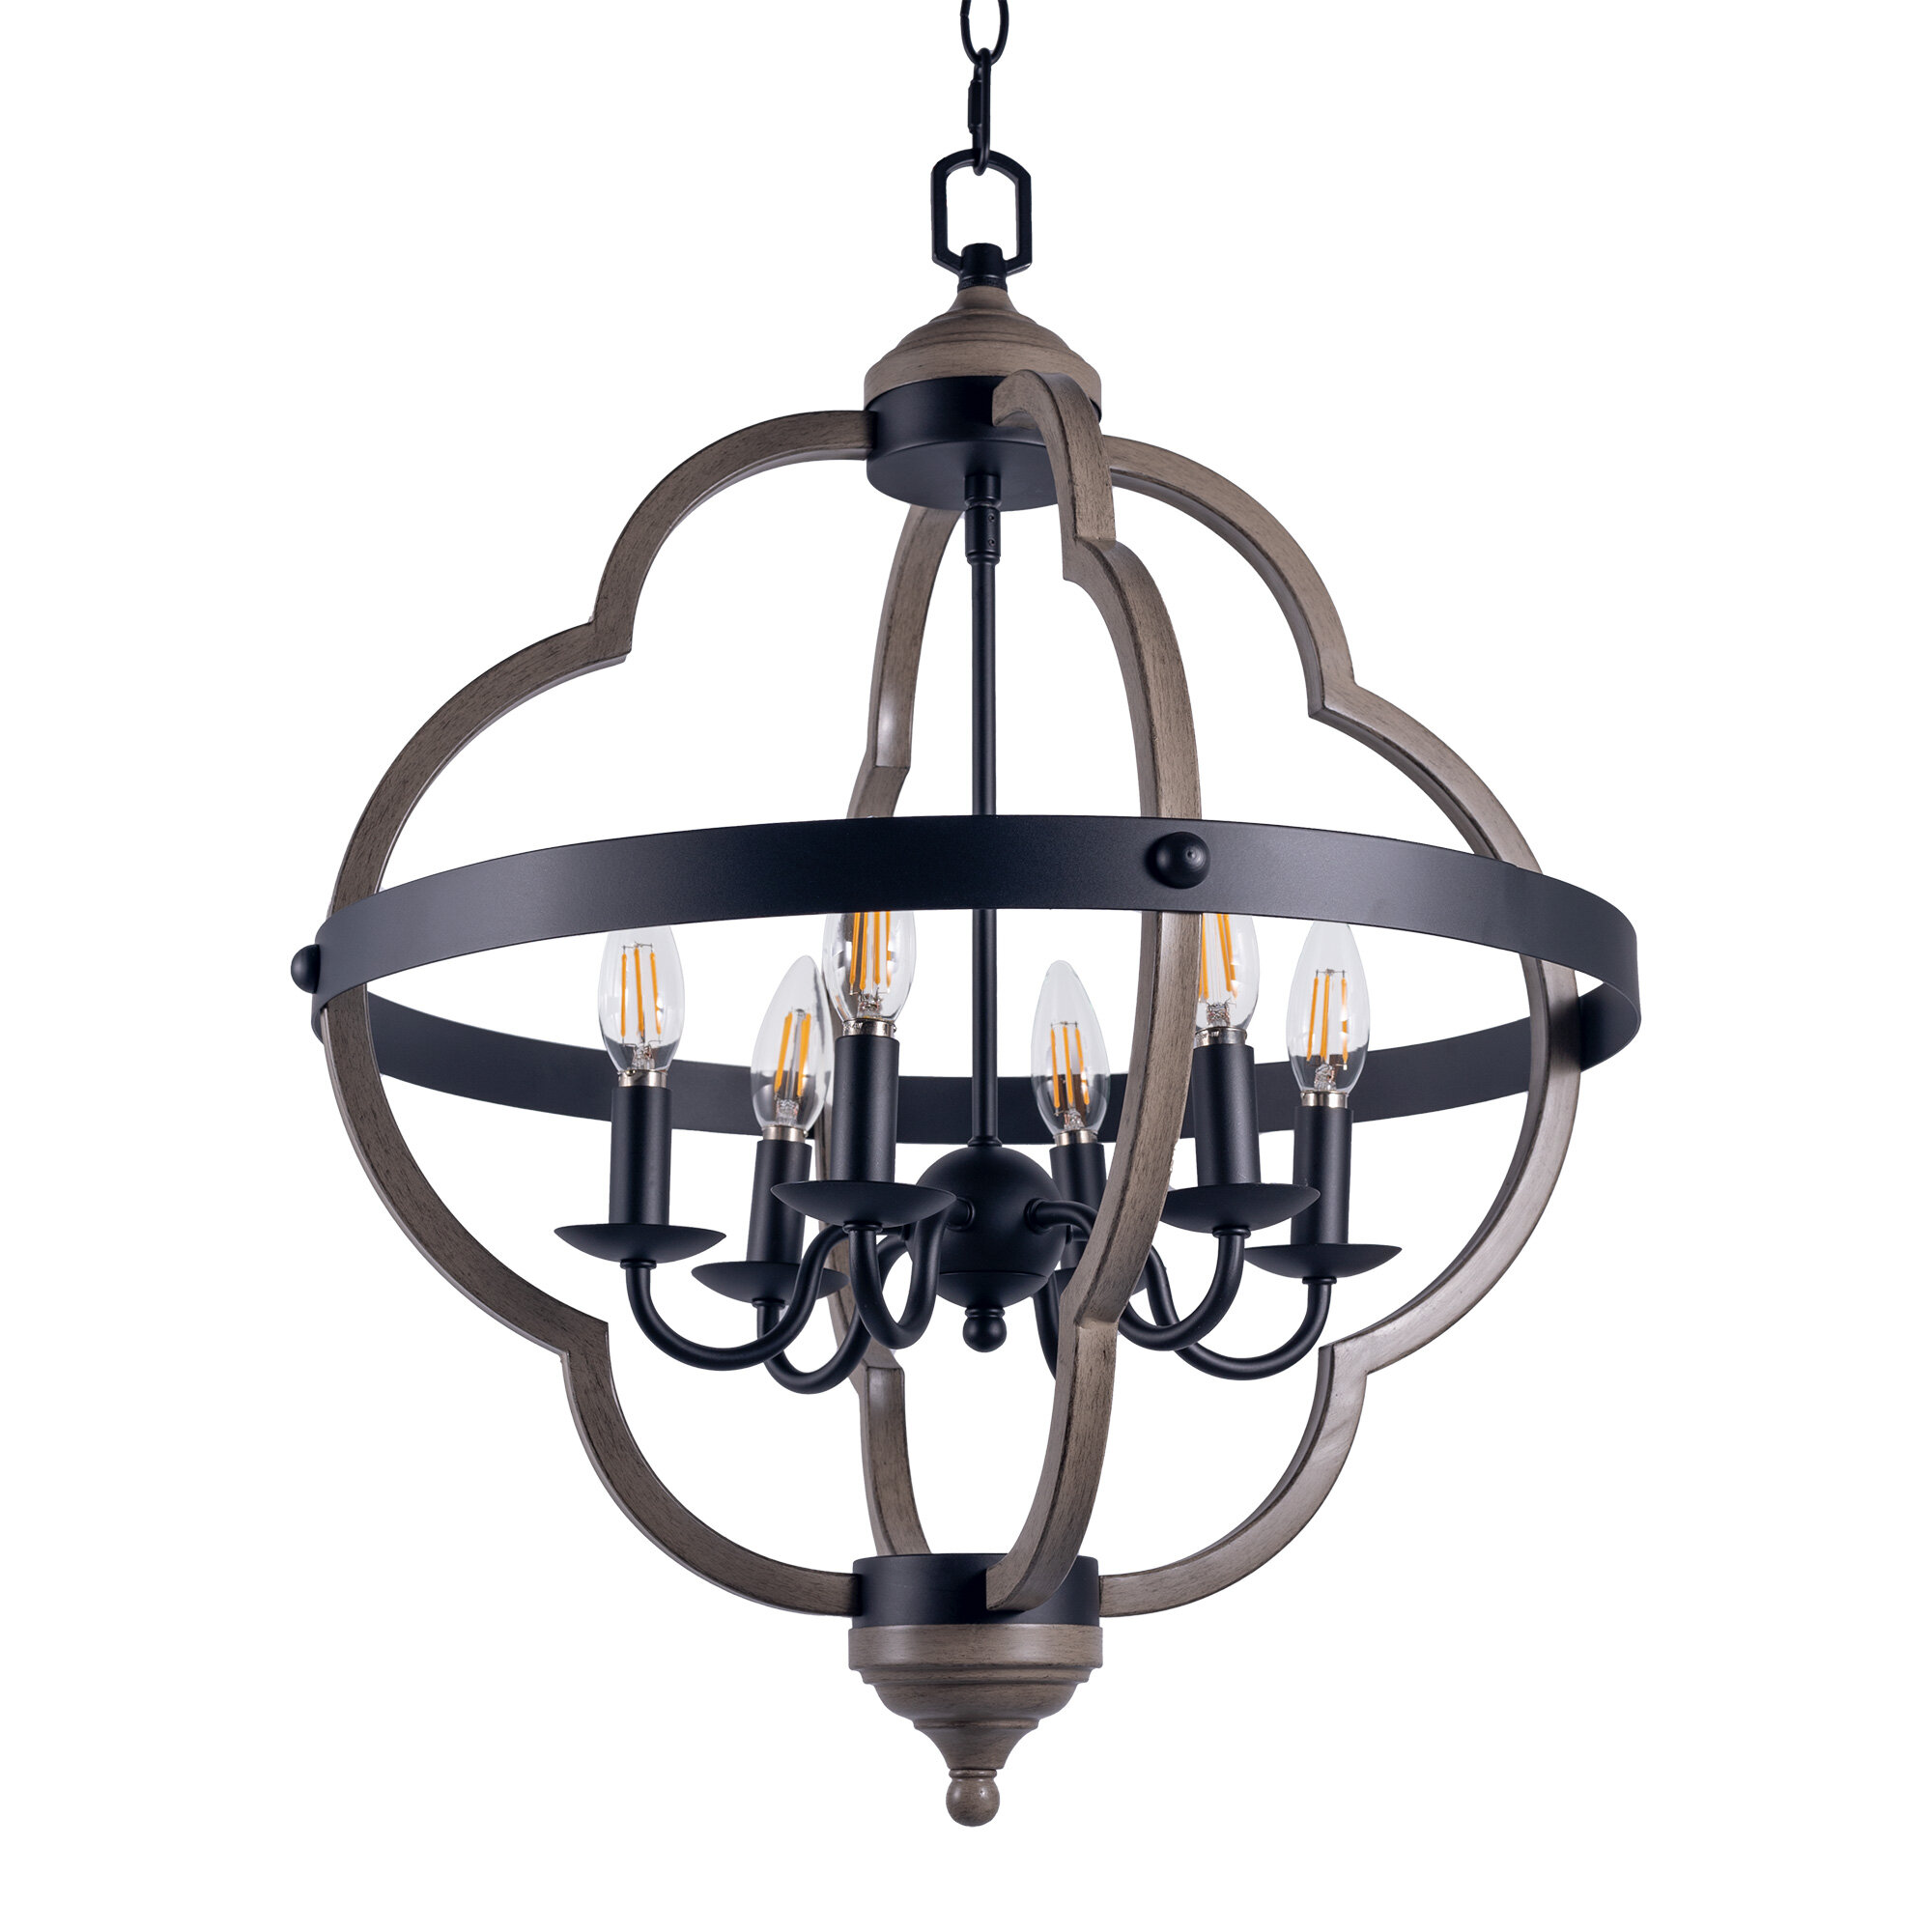 

[USA Direct] 6-Light Candle Style Geometric Chandelier Industrial Rustic Indoor Pendant Light Without Bulbs